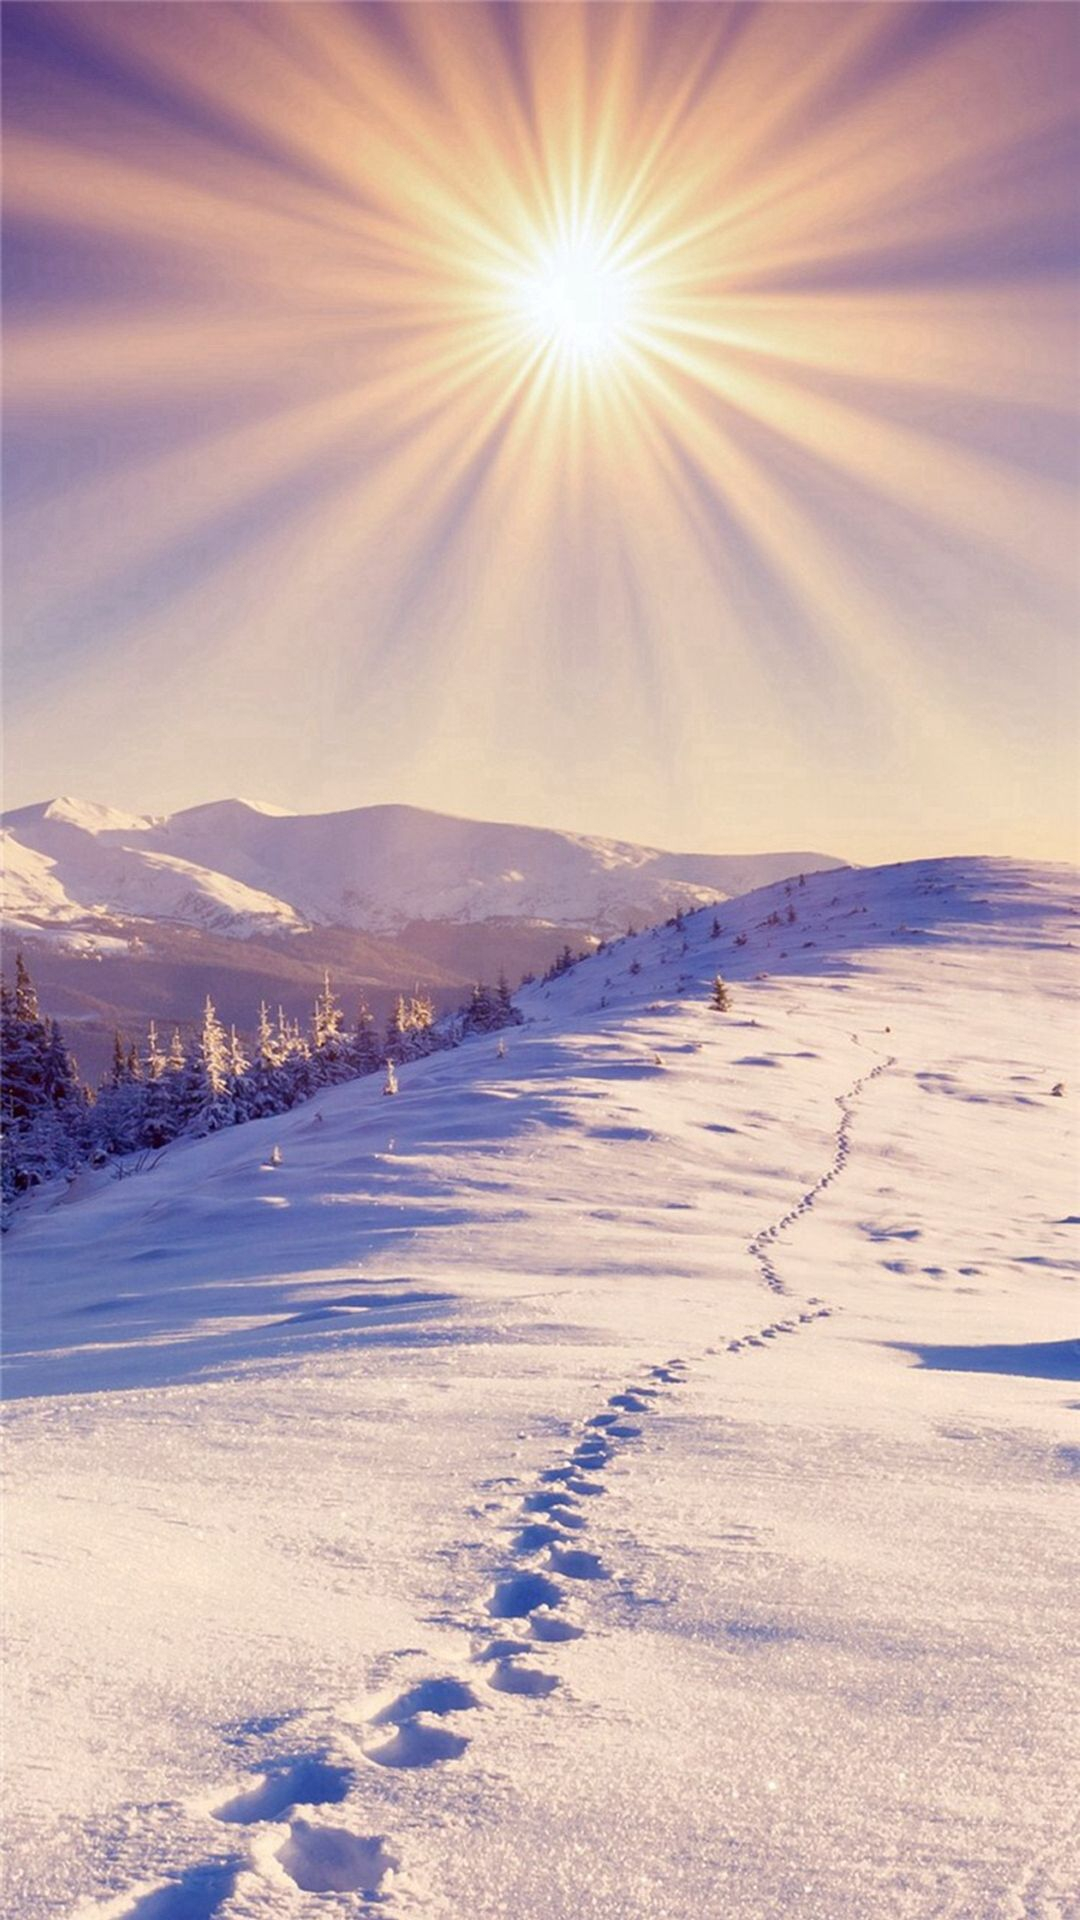 1080x1920 Nature Sunshine Bright Snowy Footprint Field iPhone 6 Wallpaper Download | iPhone Wallpapers, iPad wallpapers O&acirc;&#128;&brvbar; | Sunshine wallpaper, Natures sunshine, Snowy field